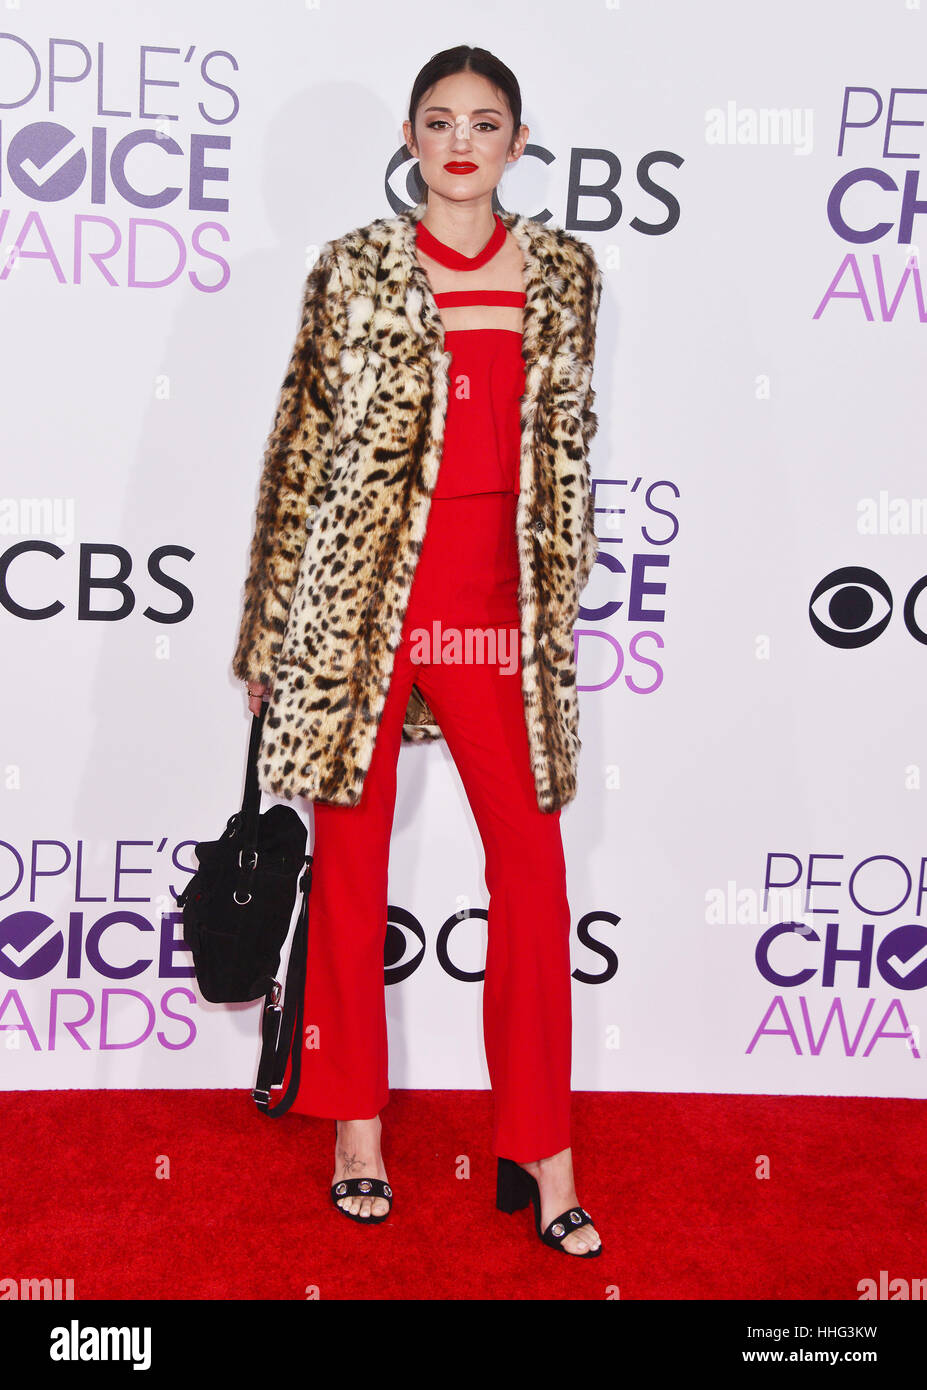 Caroline D'Amore 306 arriving at the People's Choice Awards 2017 at the Microsoft Theatre in Los Angeles. January 18, 2017. Stock Photo